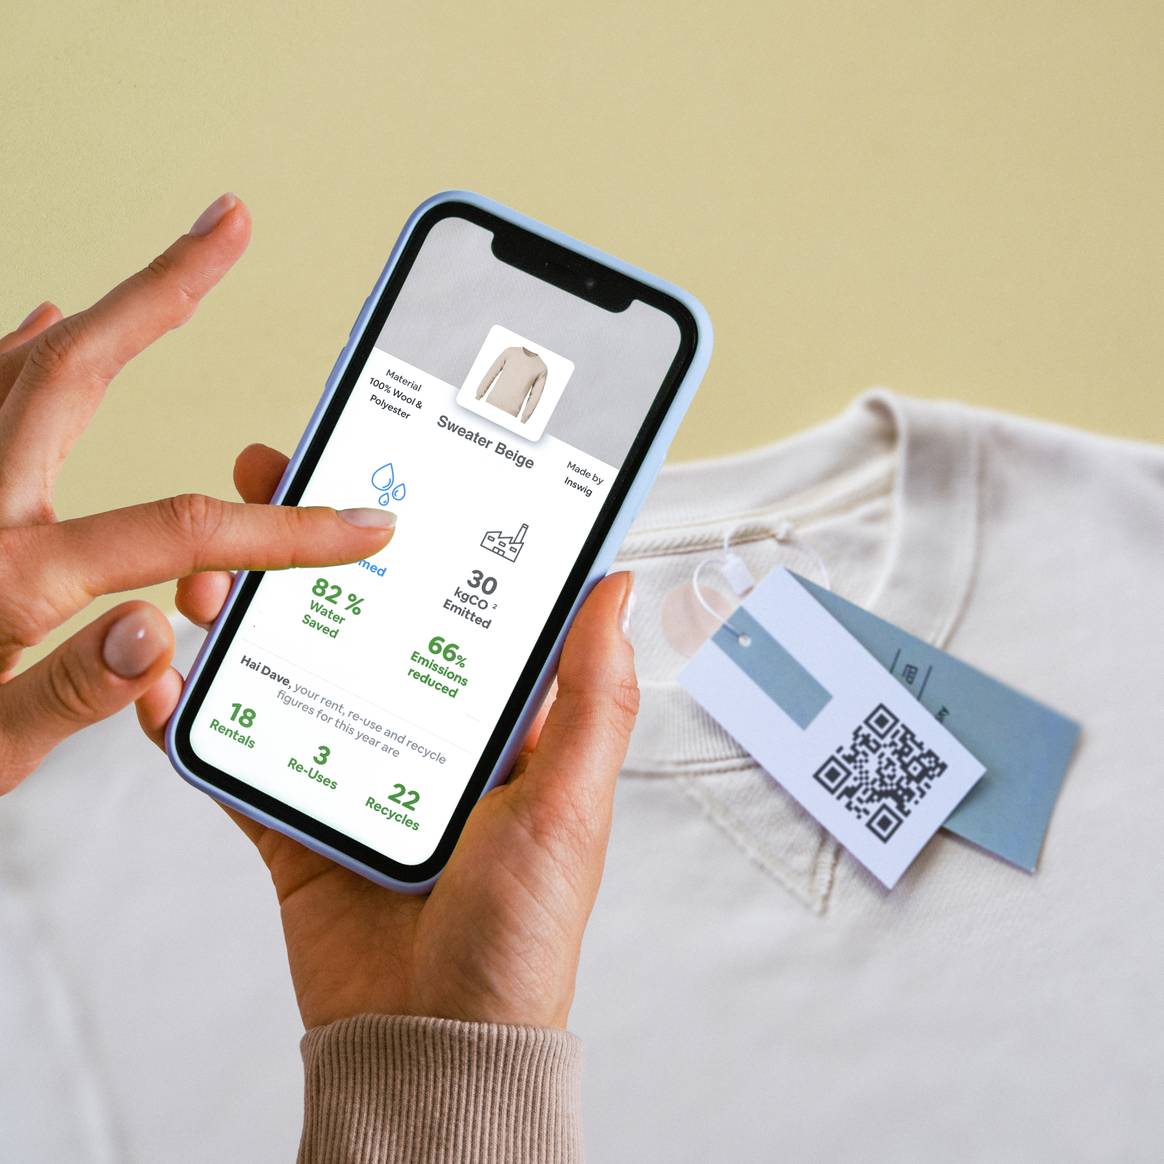 TrusTrace's platform linked to clothing QR codes.